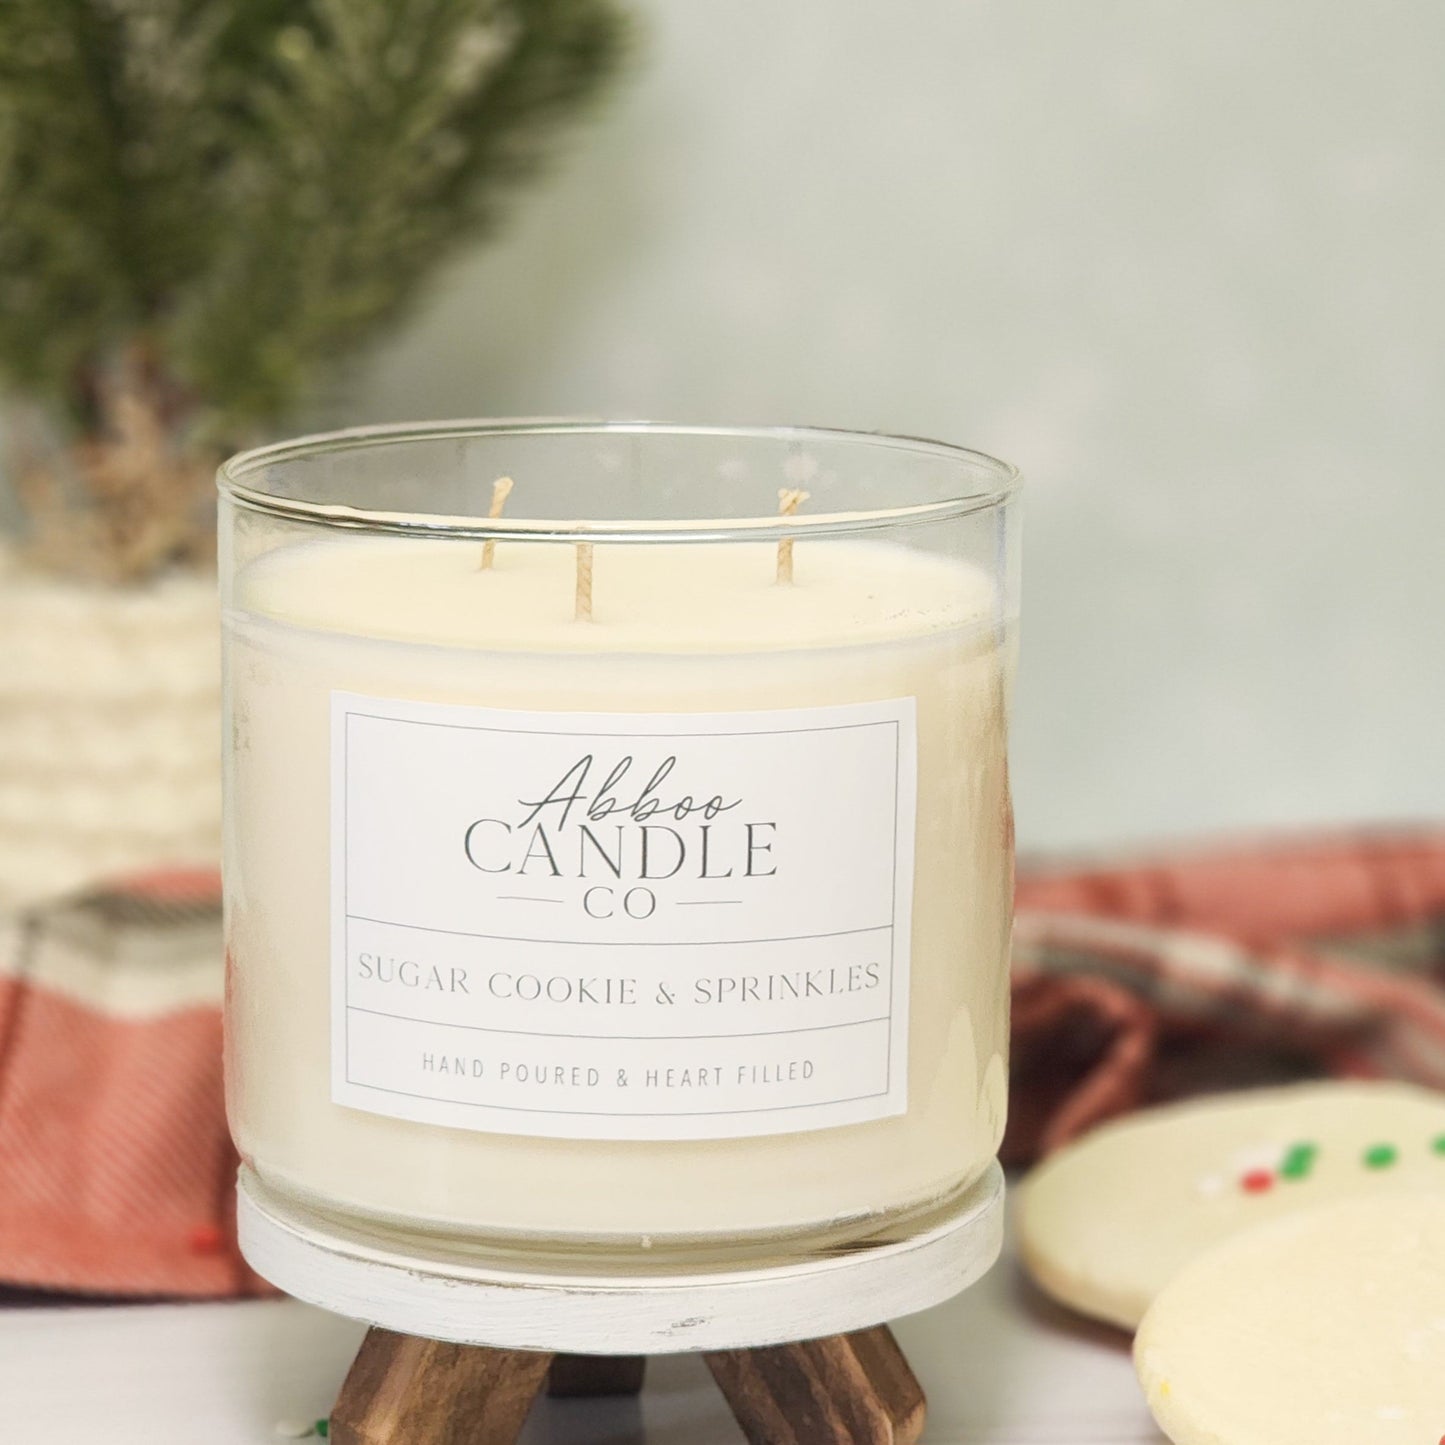 Sugar Cookie and Spinkles 3-Wick Soy Candle - Abboo Candle Co® Wholesale